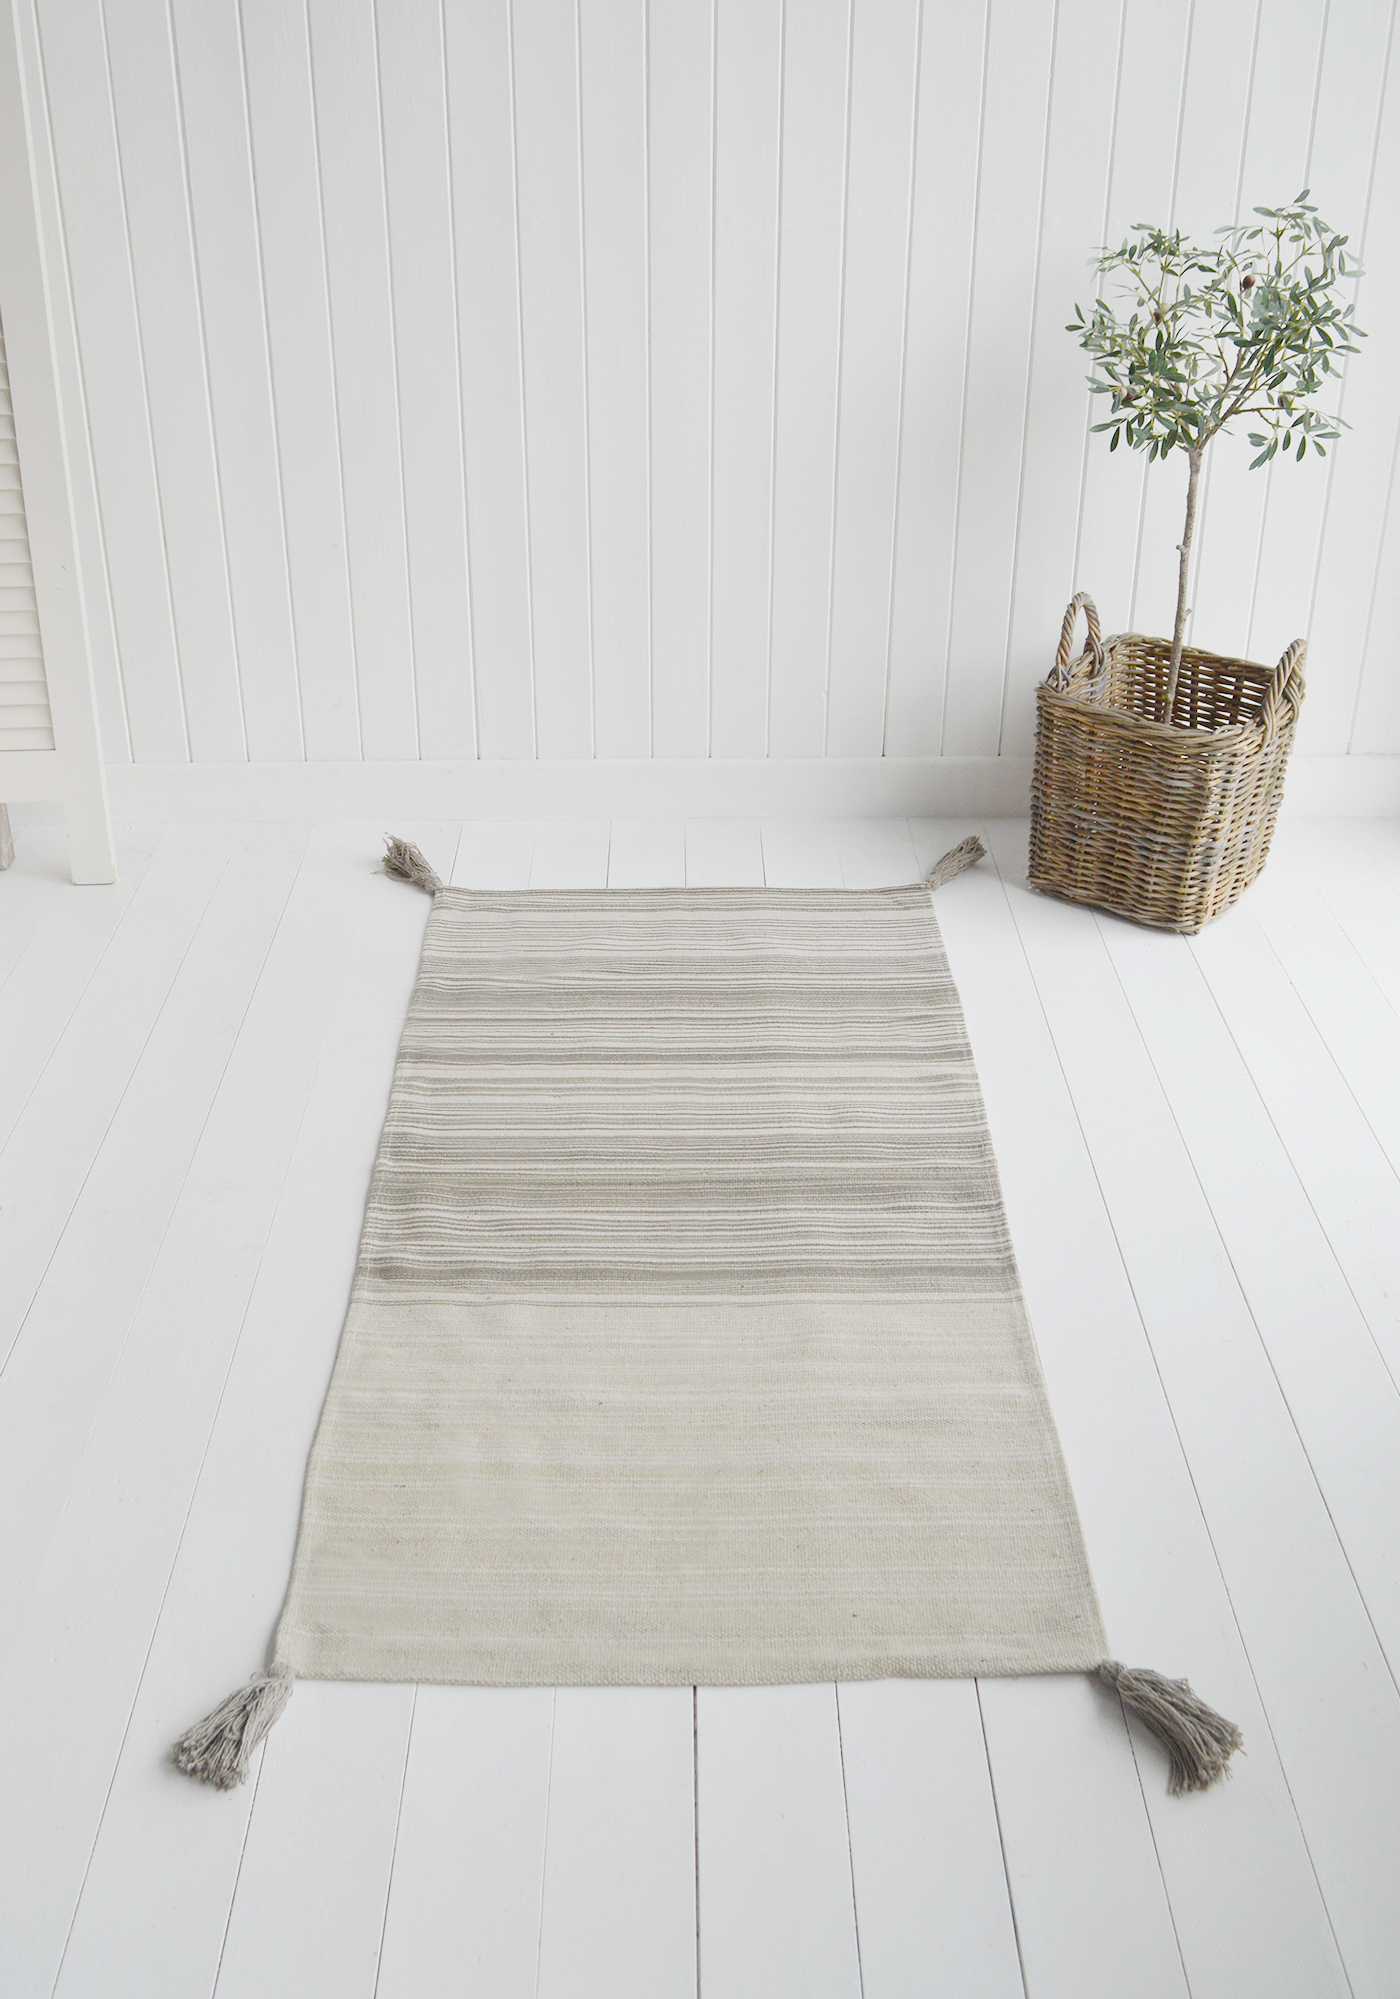 Hampton Rug Floor Grey and Linen New England Coastal, Country and City homes - The White Lighthouse Furniture for hallway, living room, bedroom and bathroom